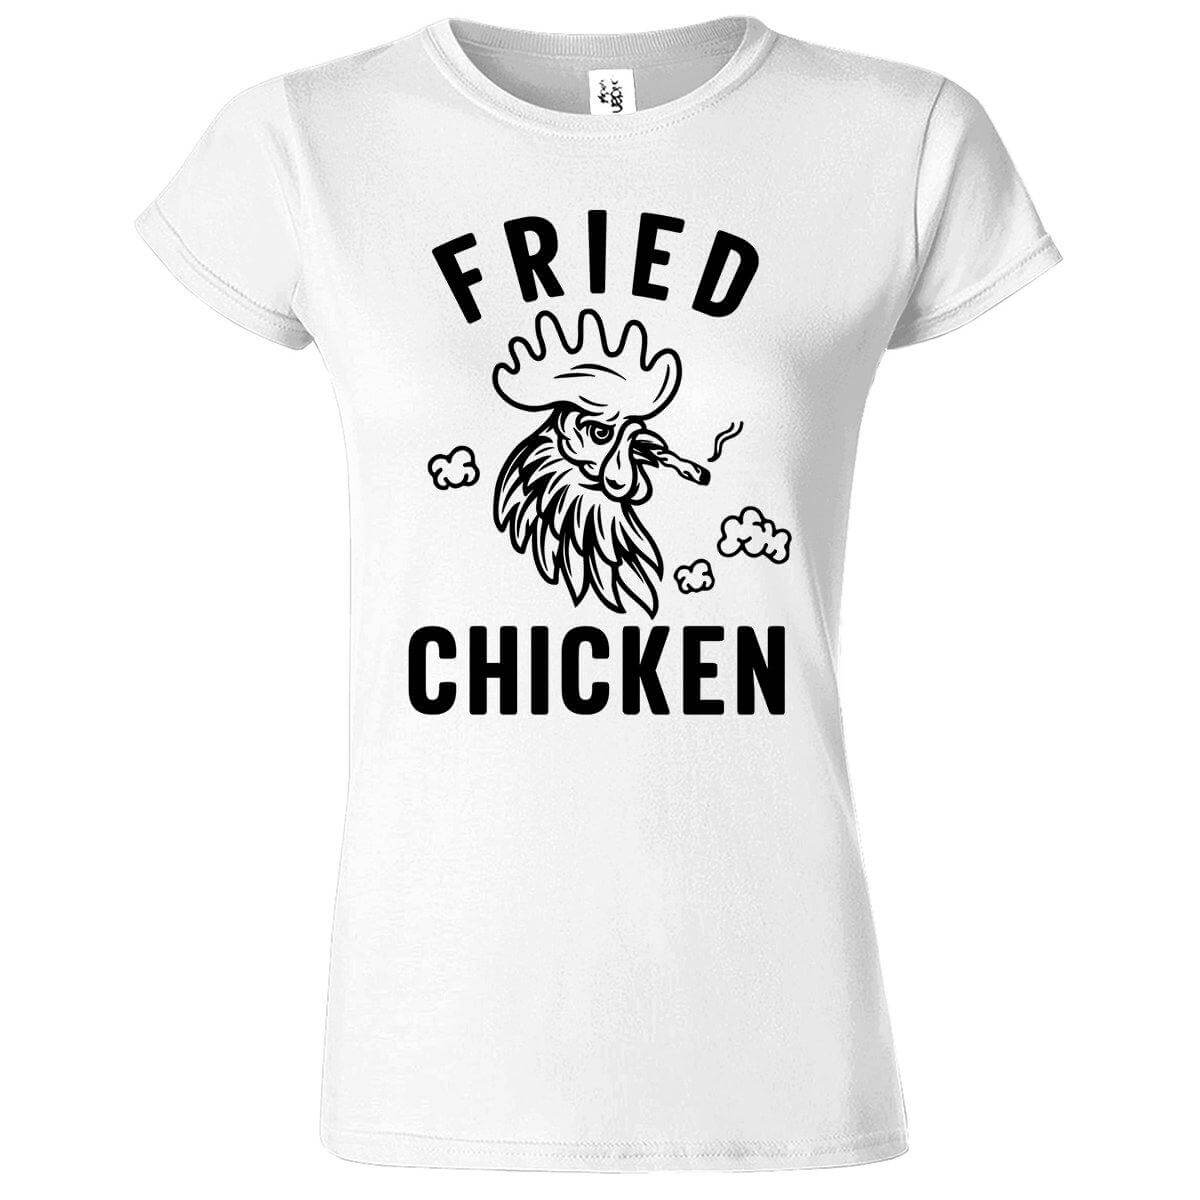 Fried Chicken Printed T-Shirt for Women's - ApparelinClick